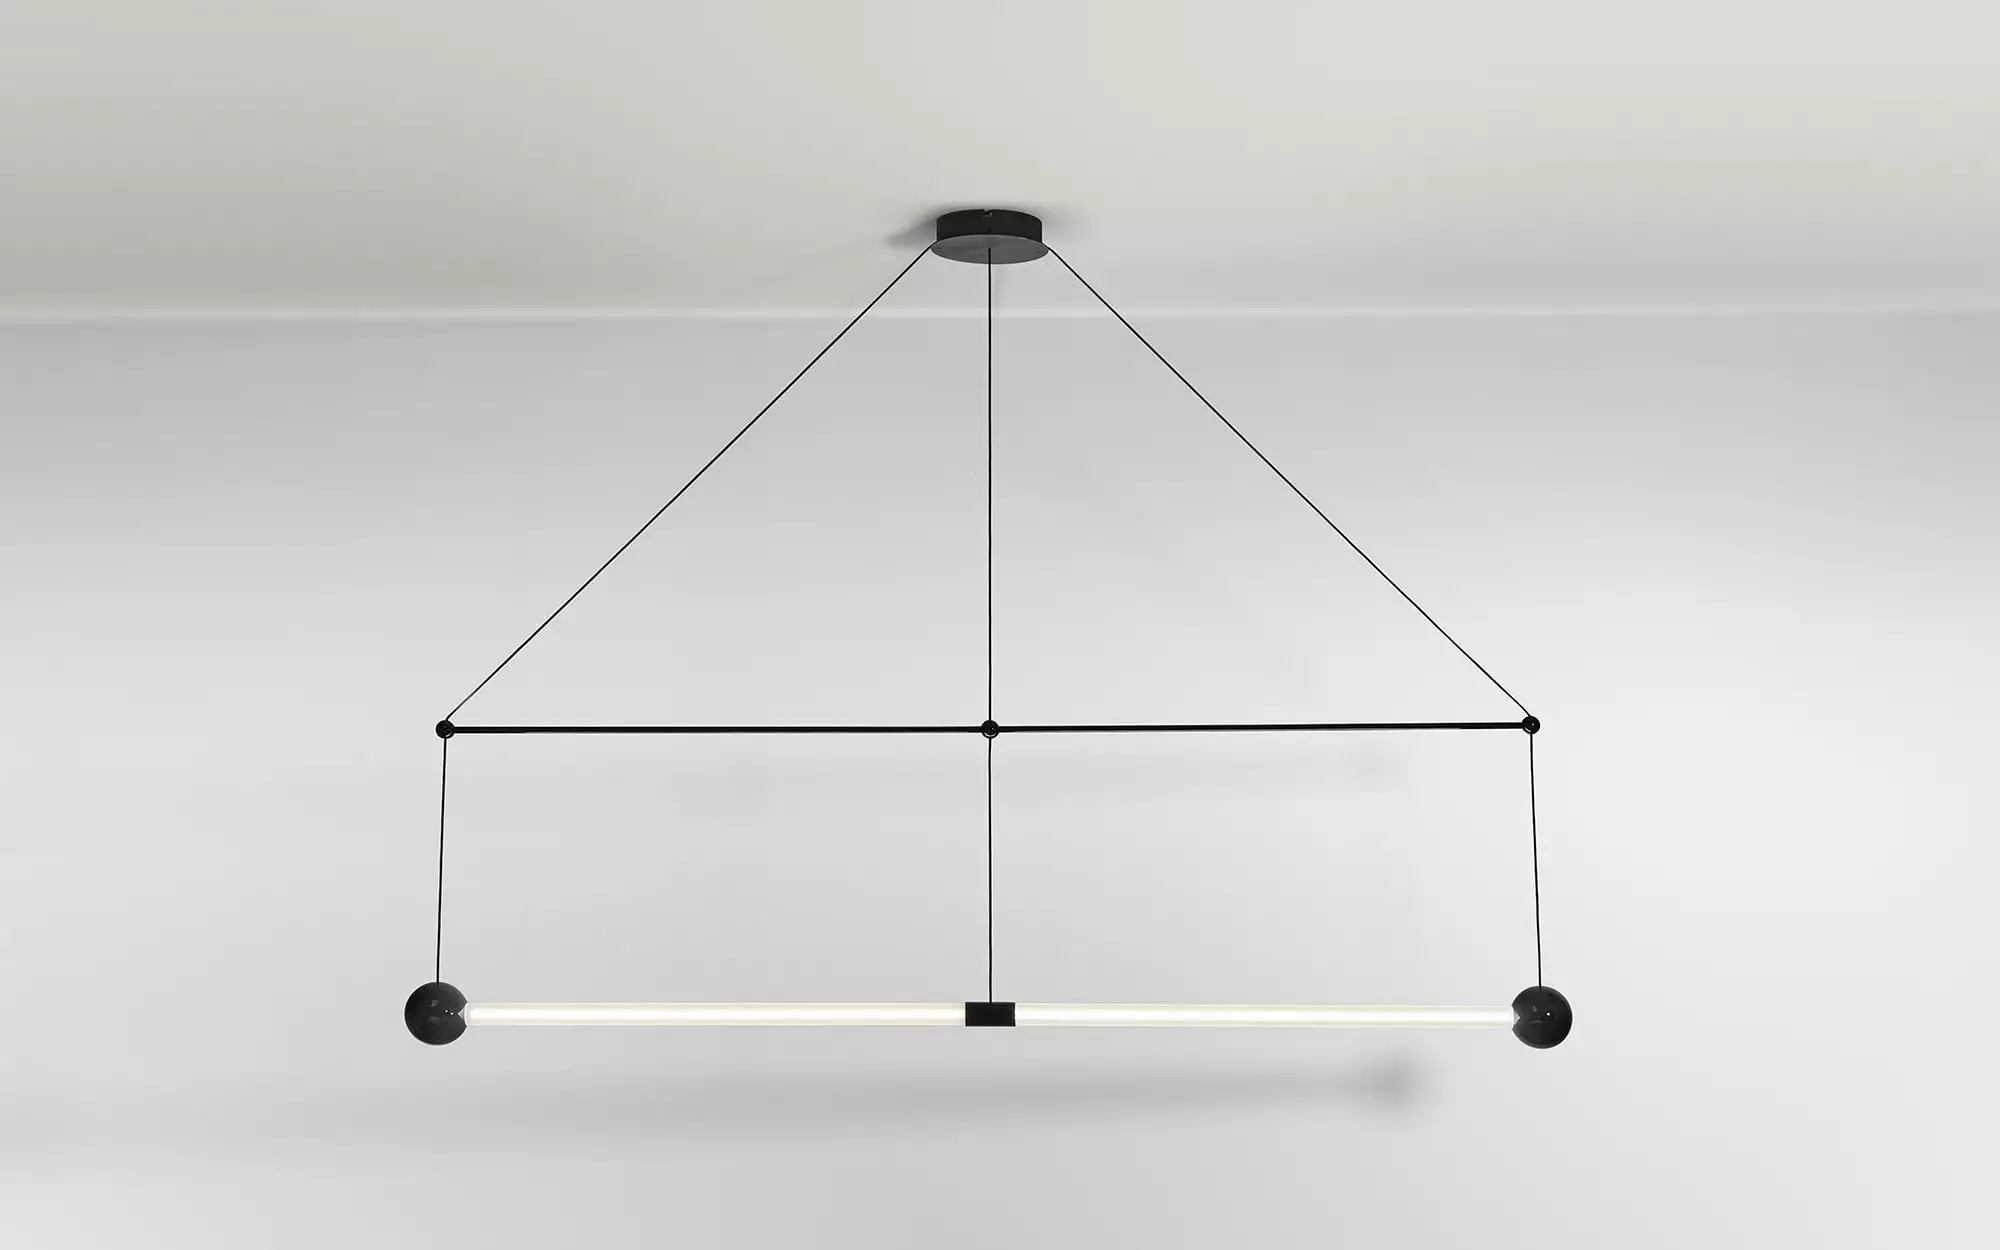 Trapeze 1 Ceiling light - Pierre Charpin - Resemblance(s).